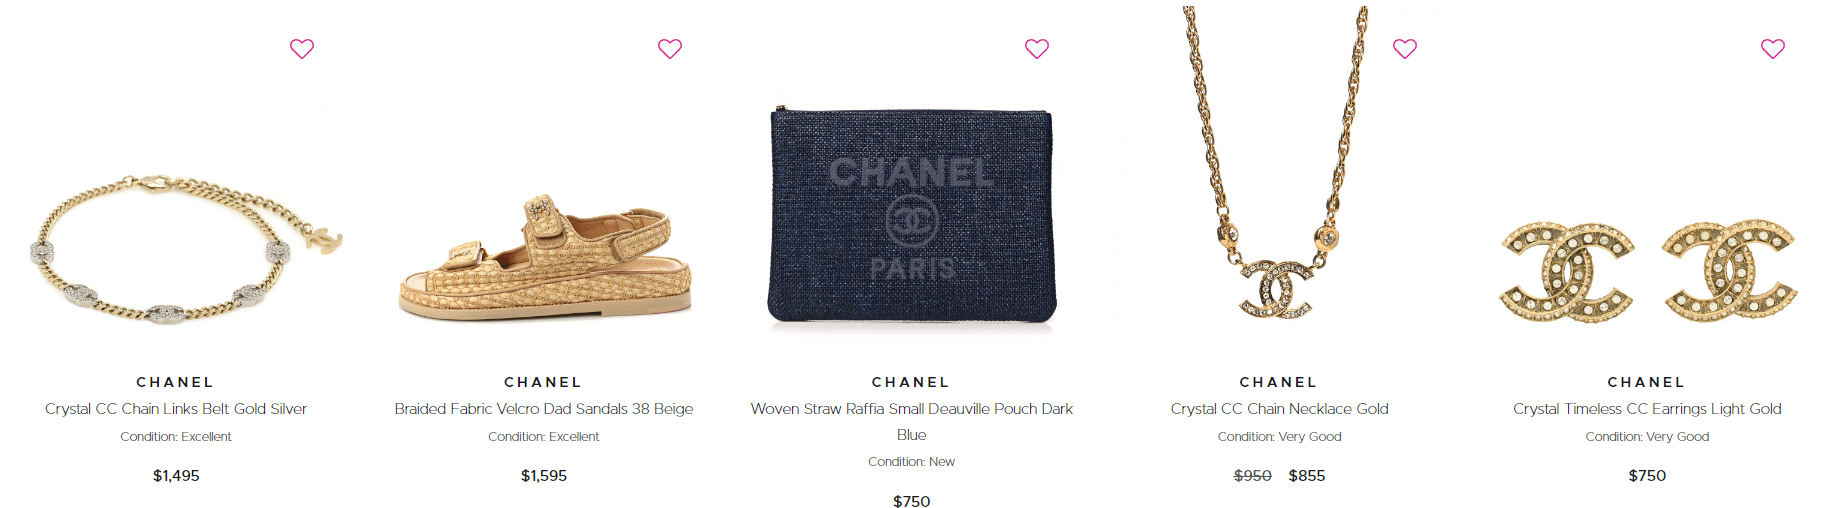 I Bought the Cheapest Thing from Chanel